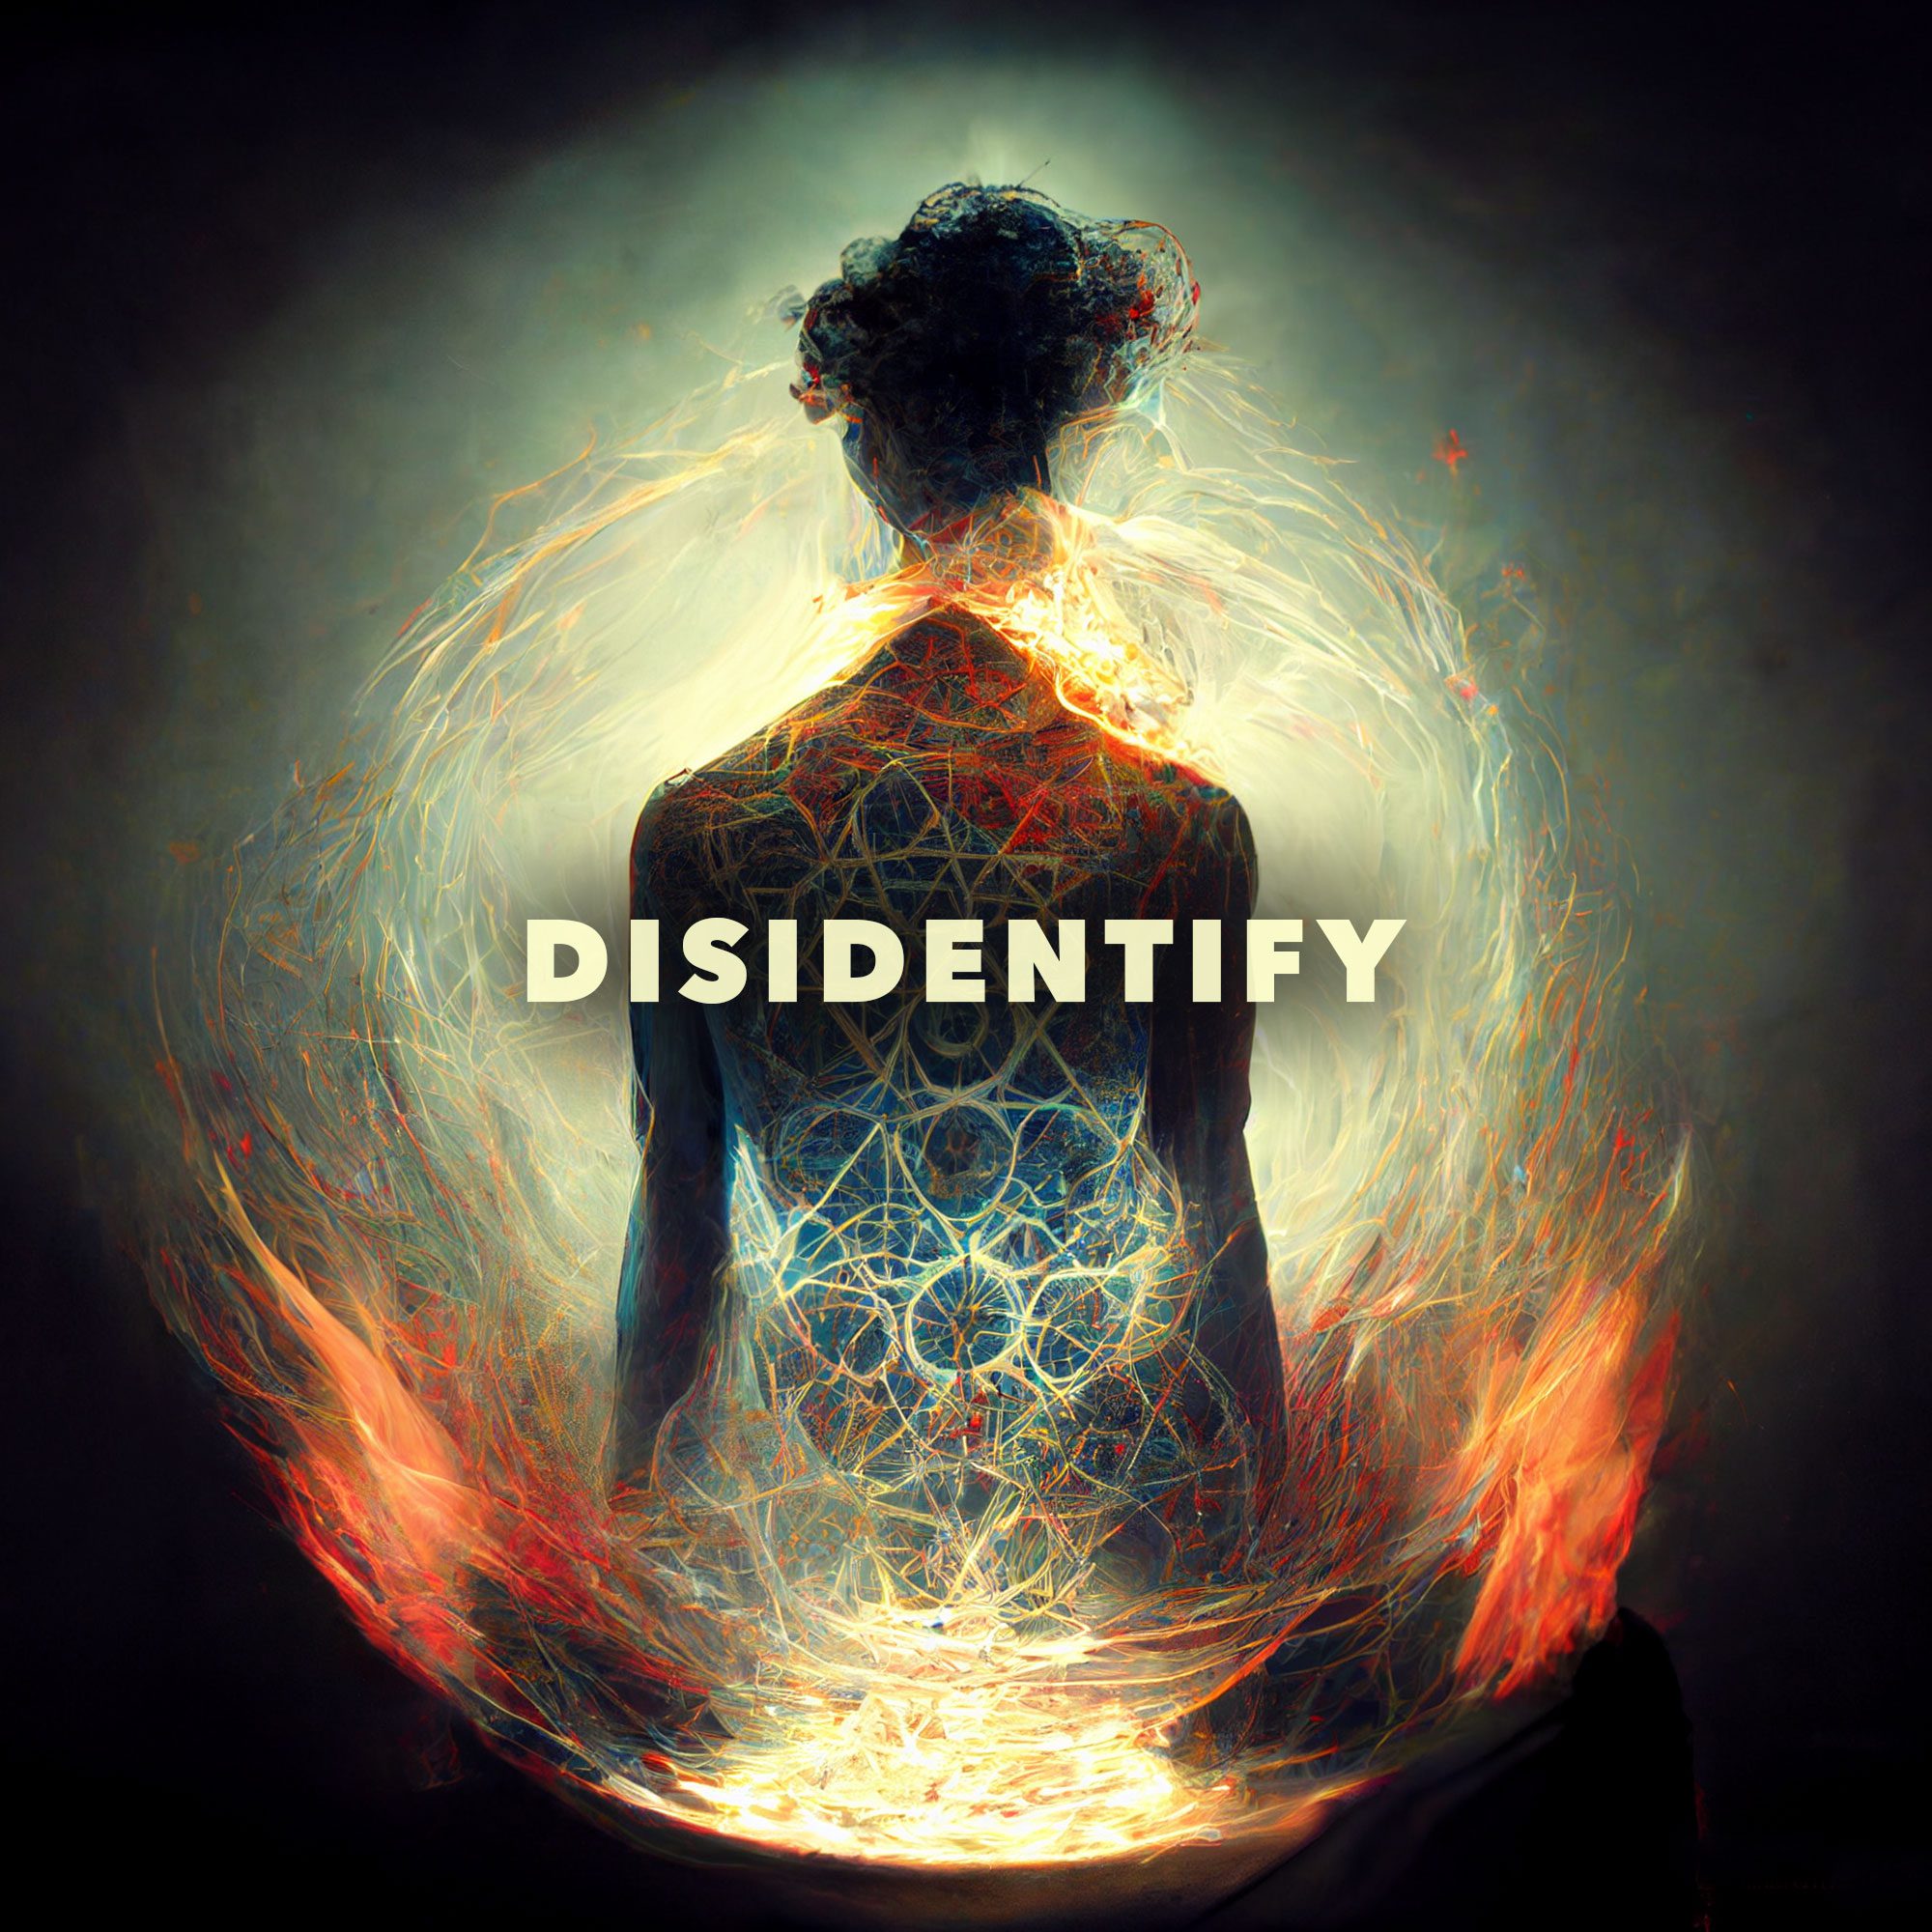 DISIDENTIFY - dying to the pattern's world